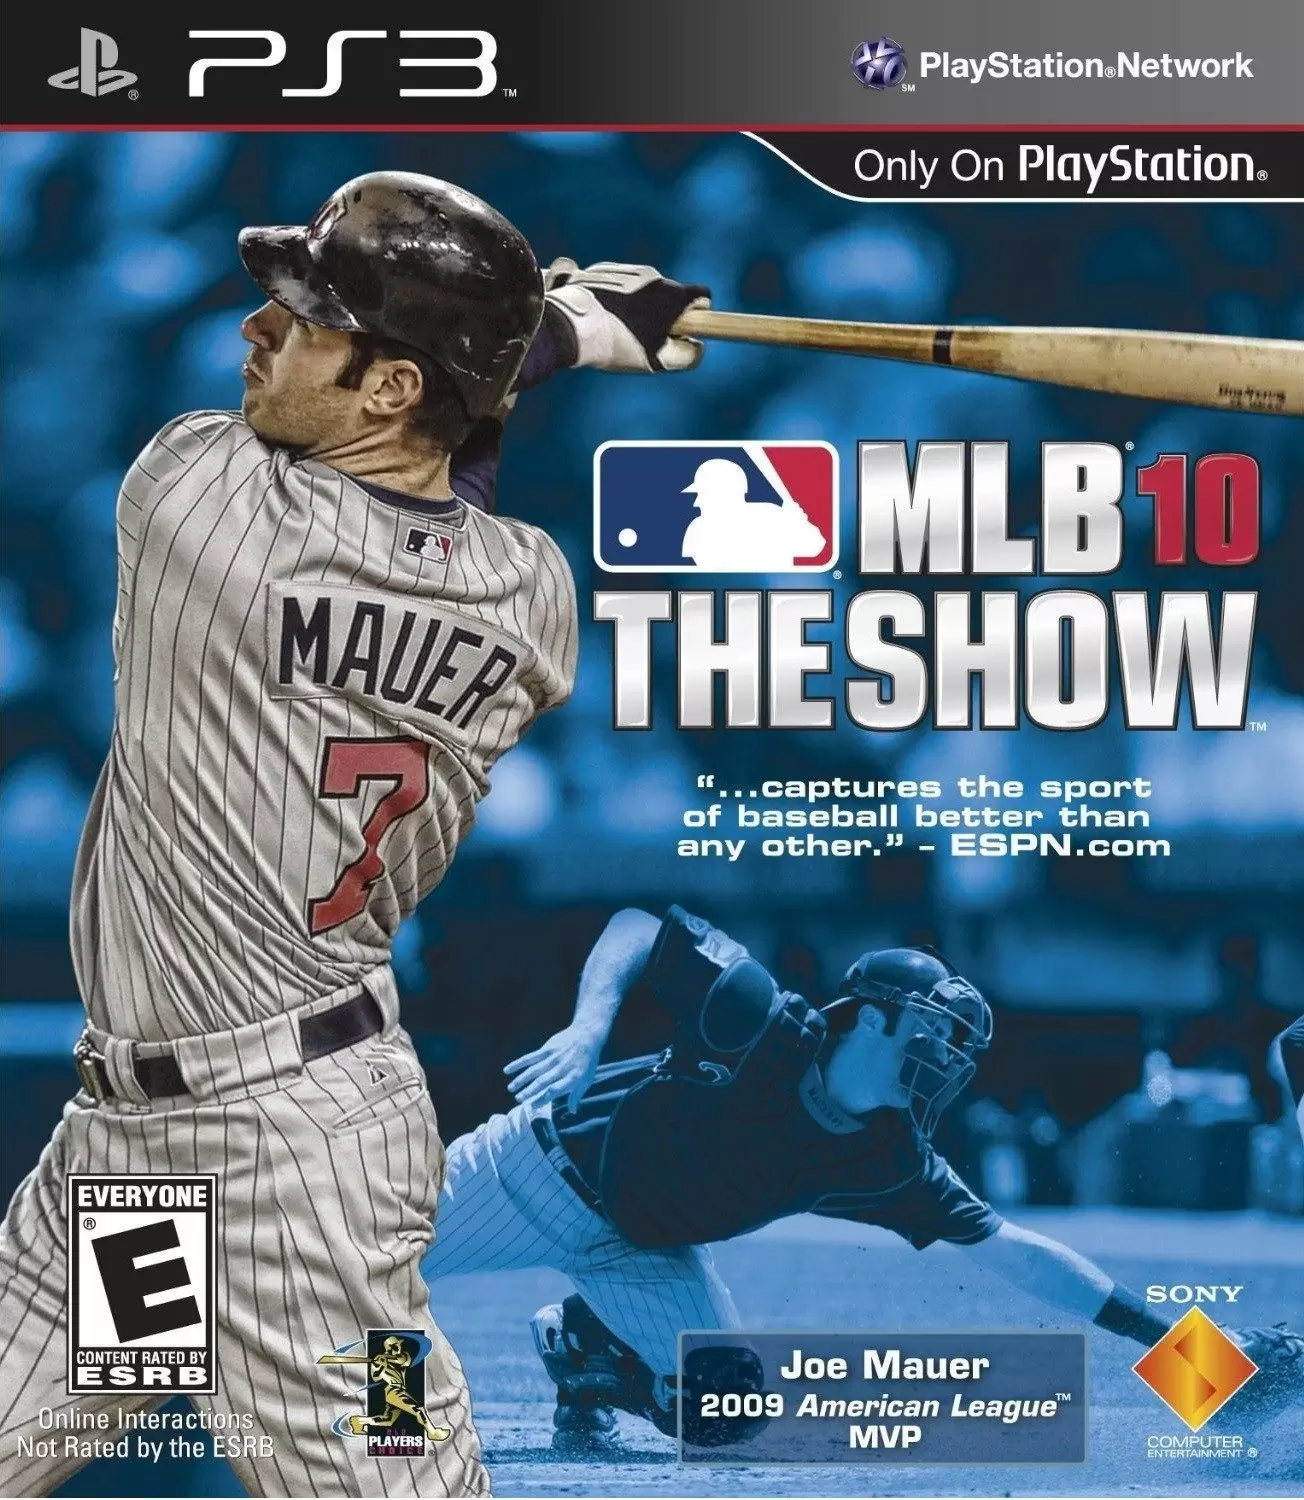 PS3 Games - MLB 10: The Show